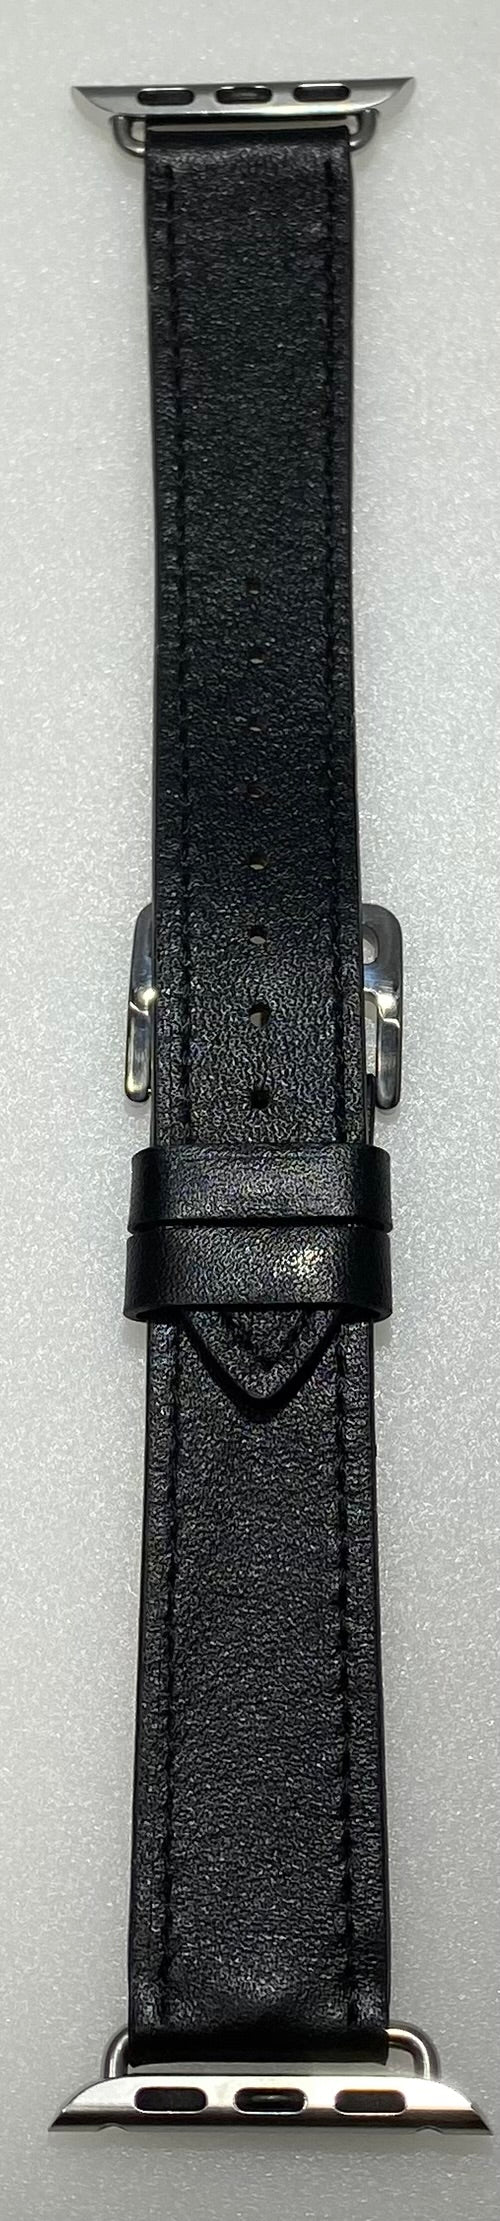 Apple iWatch Bands Black Leathers Strap Wristbands